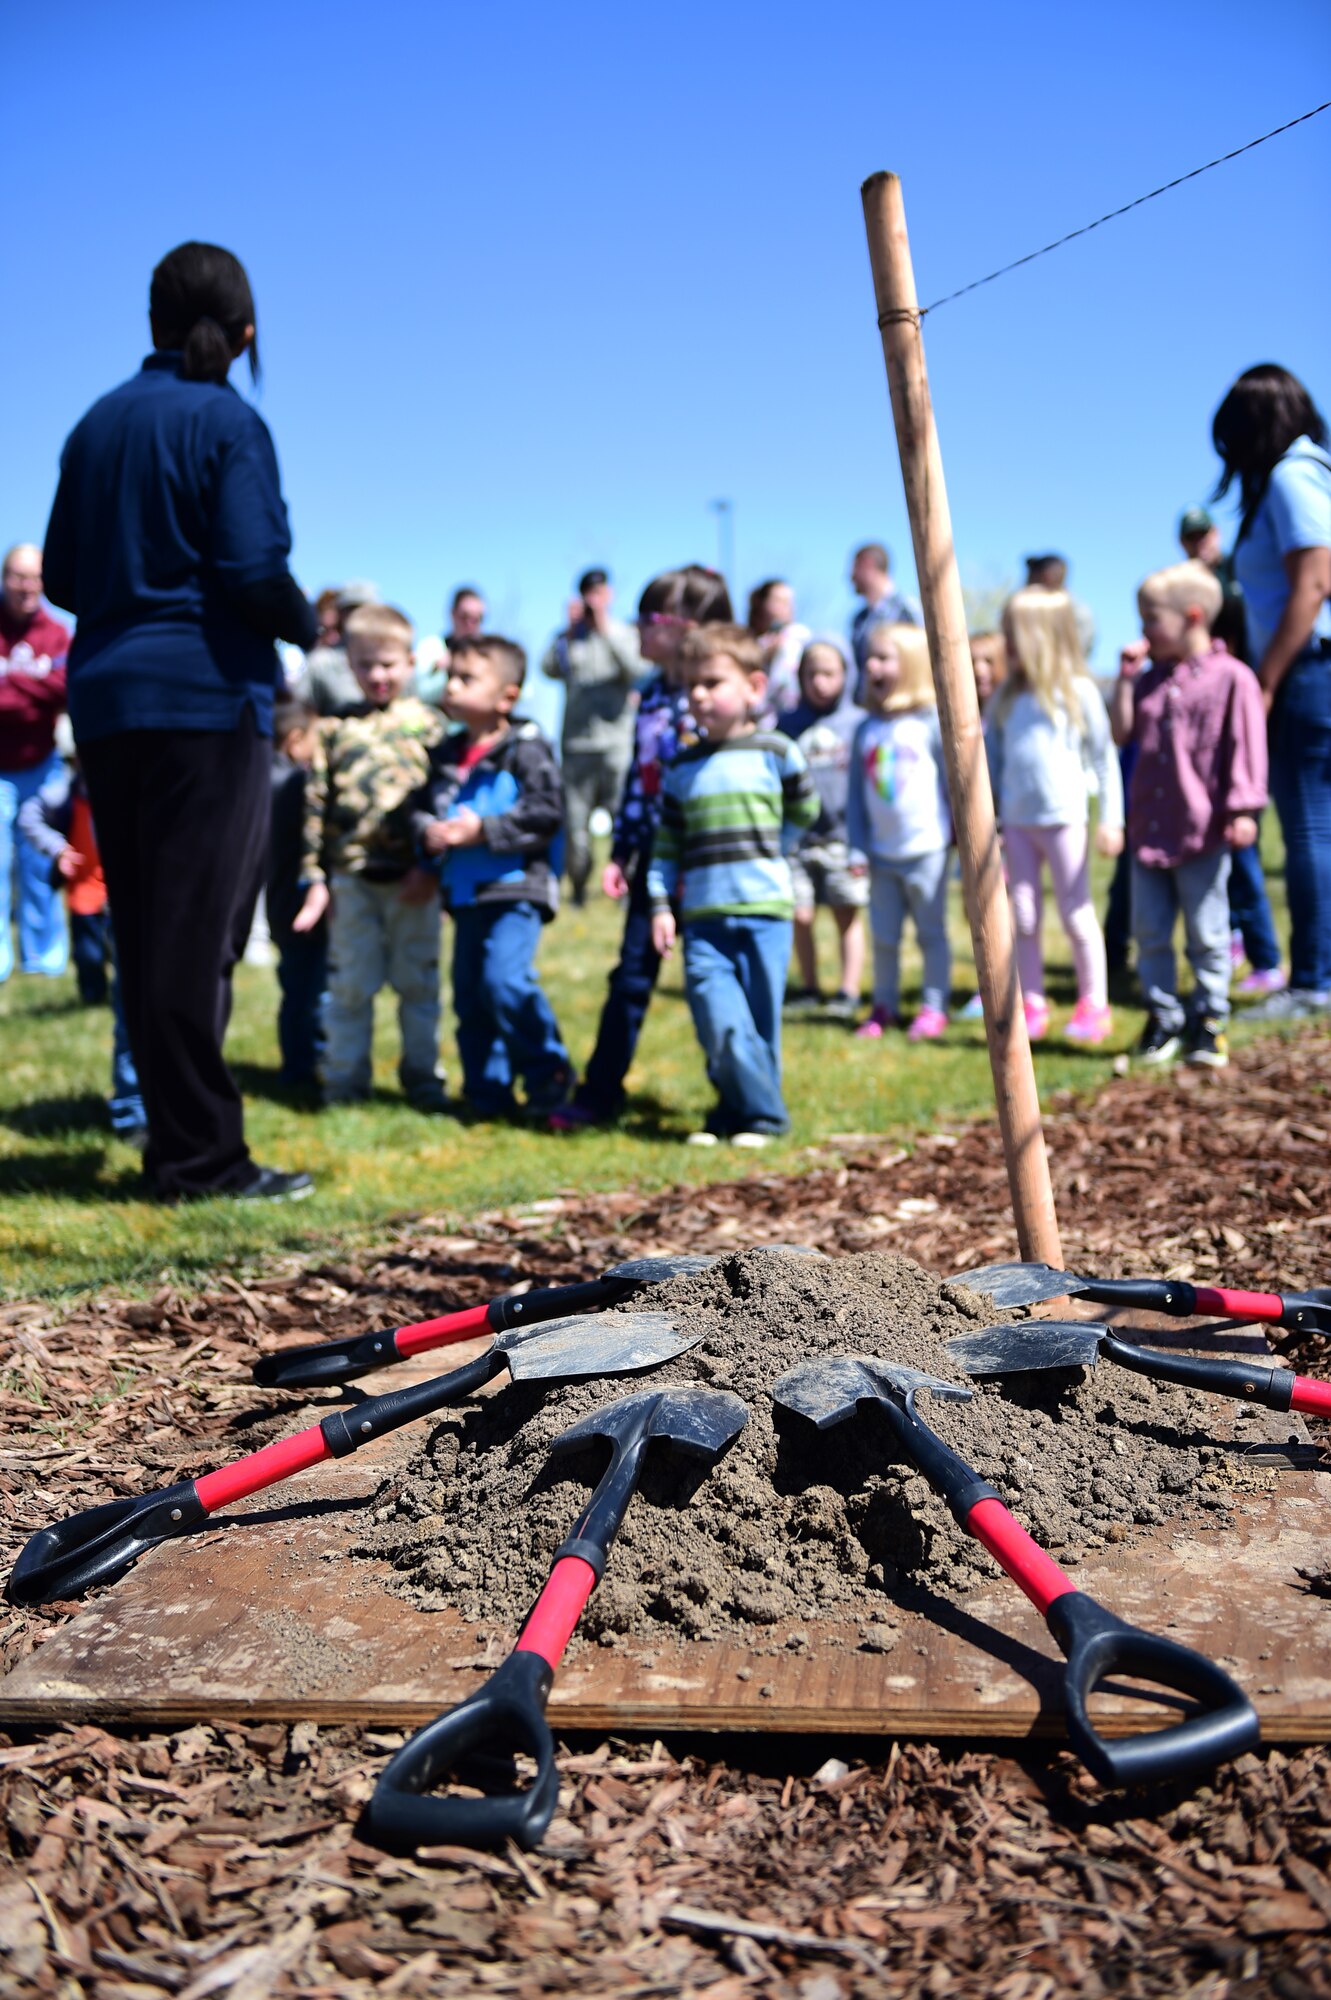 Children from A-Basin Child Development Center line up prior to getting shovels during an Earth and Arbor Day celebration April 21, 2016, on Buckley Air Force Base, Colo. Earth Day had reached into its current status as the largest secular observance in the world, celebrated by more than a billion people every year, and a day of action that changes human behavior and provokes policy changes. (U.S. Air Force photo by Senior Airman Racheal E. Watson/Released)